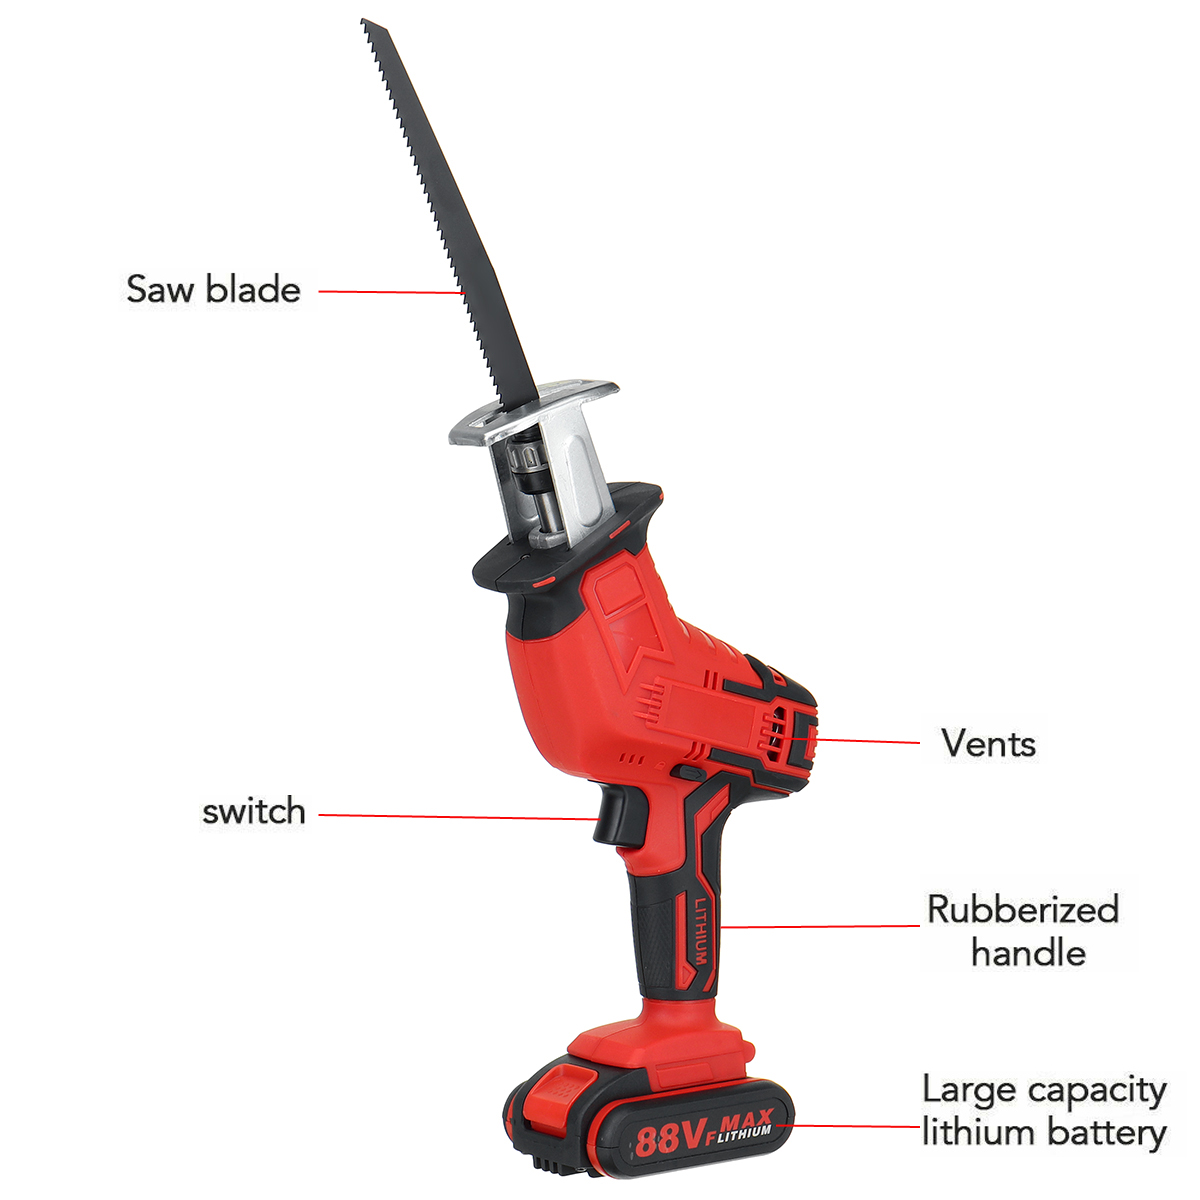 88VF-Cordless-Electric-Reciprocating-Saw-Outdoor-Portable-Woodworking-Tool-One-Hand-Saw-W-12-Battery-1883228-7